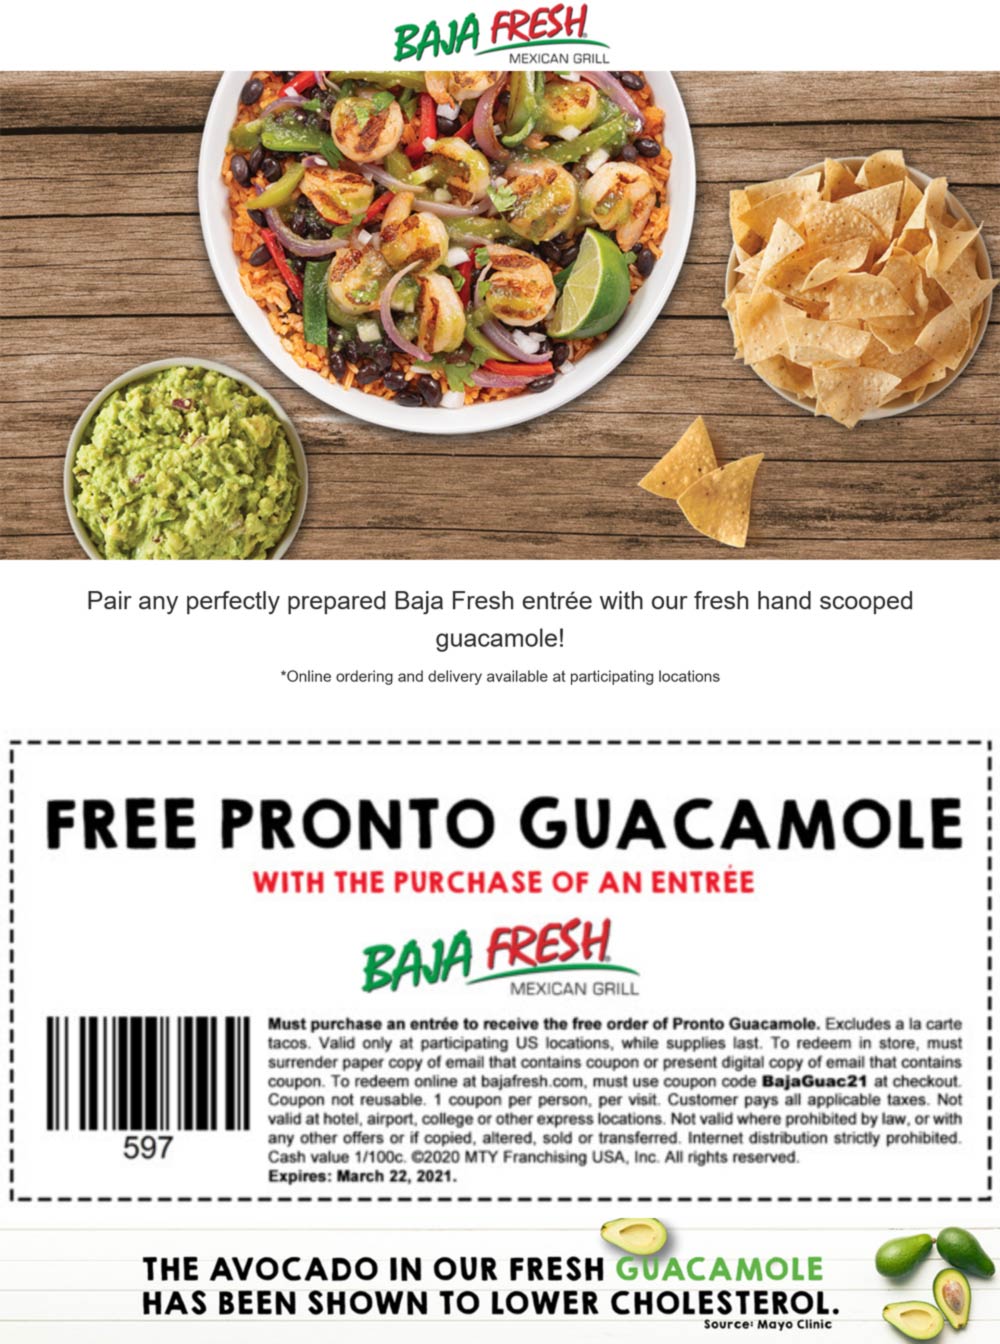 Baja Fresh restaurants Coupon  Free pronto guacamole with your entree at Baja Fresh Mexican grill #bajafresh 